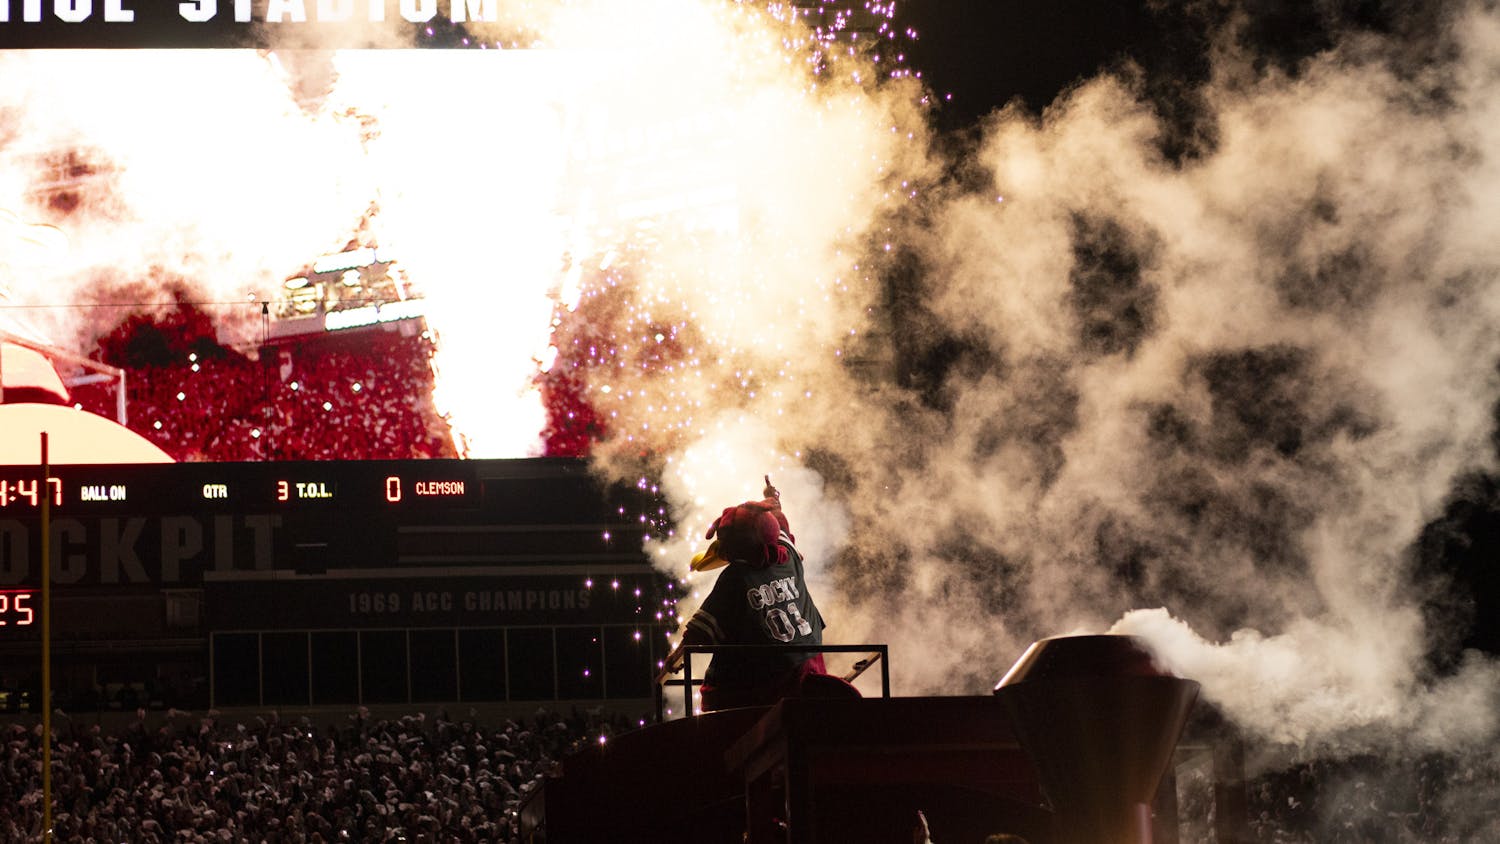 The University of South Carolina’s mascot, Cocky, makes his traditional 2001 Space Odyssey entrance at Williams-Brice Stadium on Nov. 25, 2023. The mascot updated his entrance in 2023 by emerging from a "Cockaboose" train.